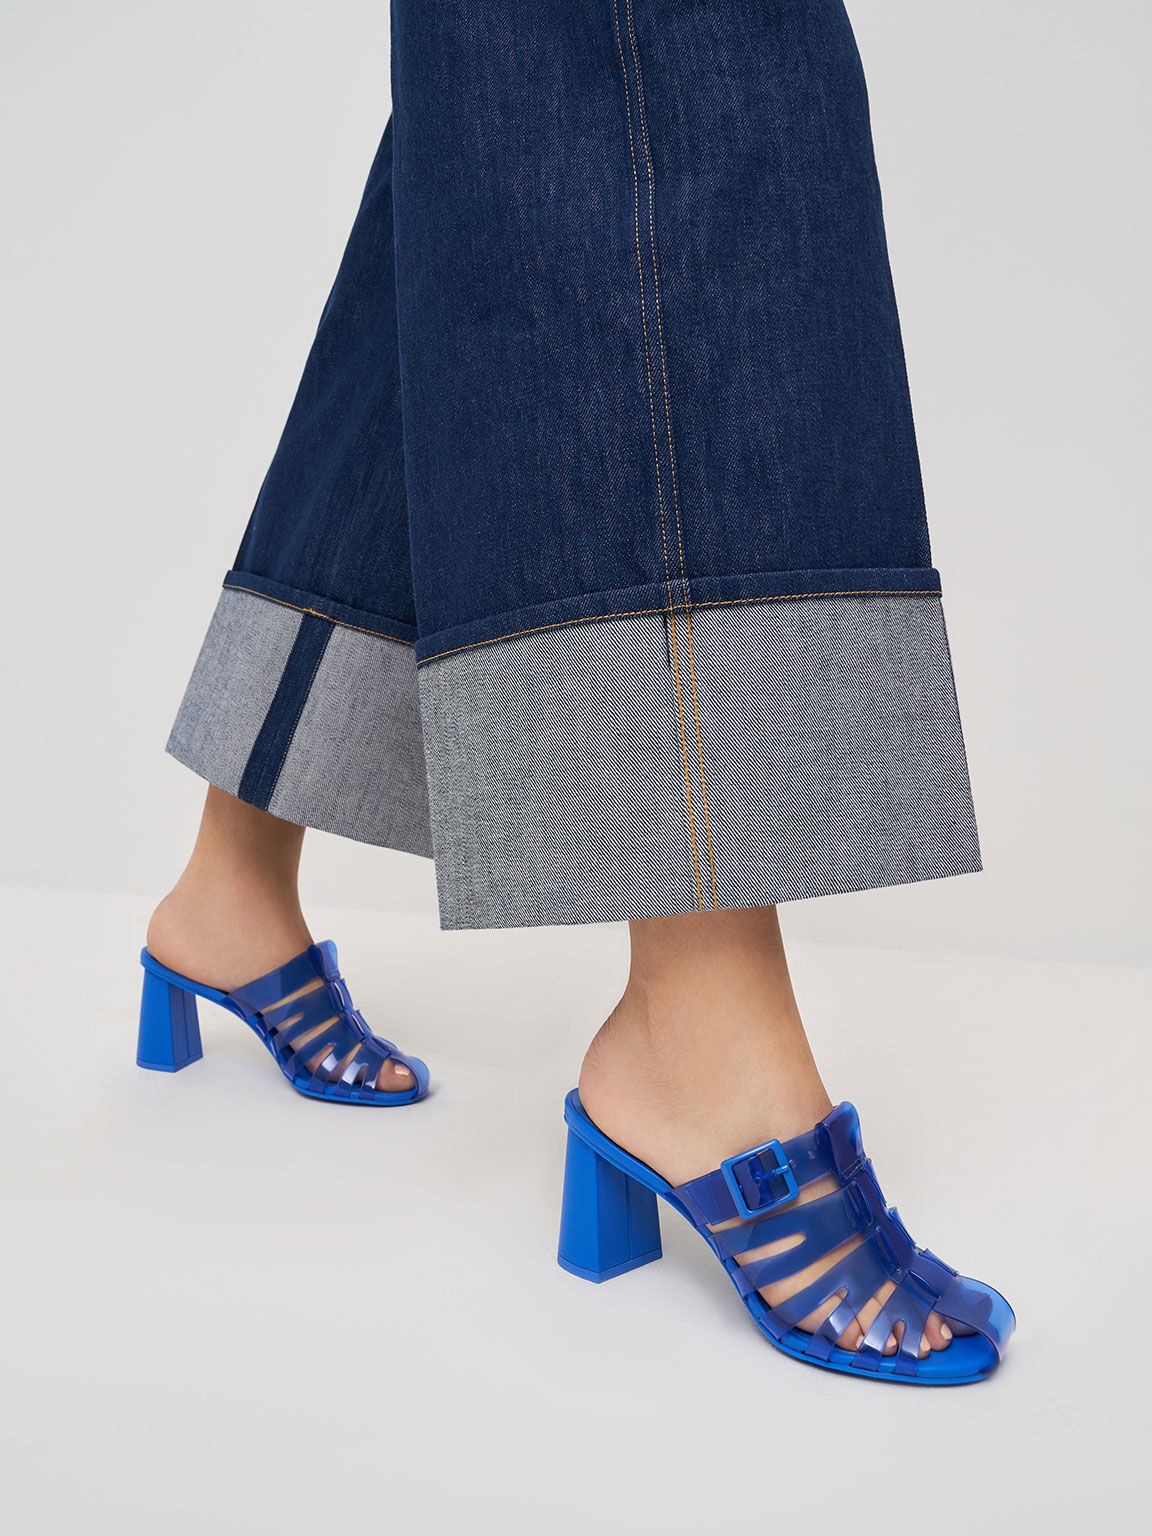 Madison See-Through Caged Mules, Blue, hi-res